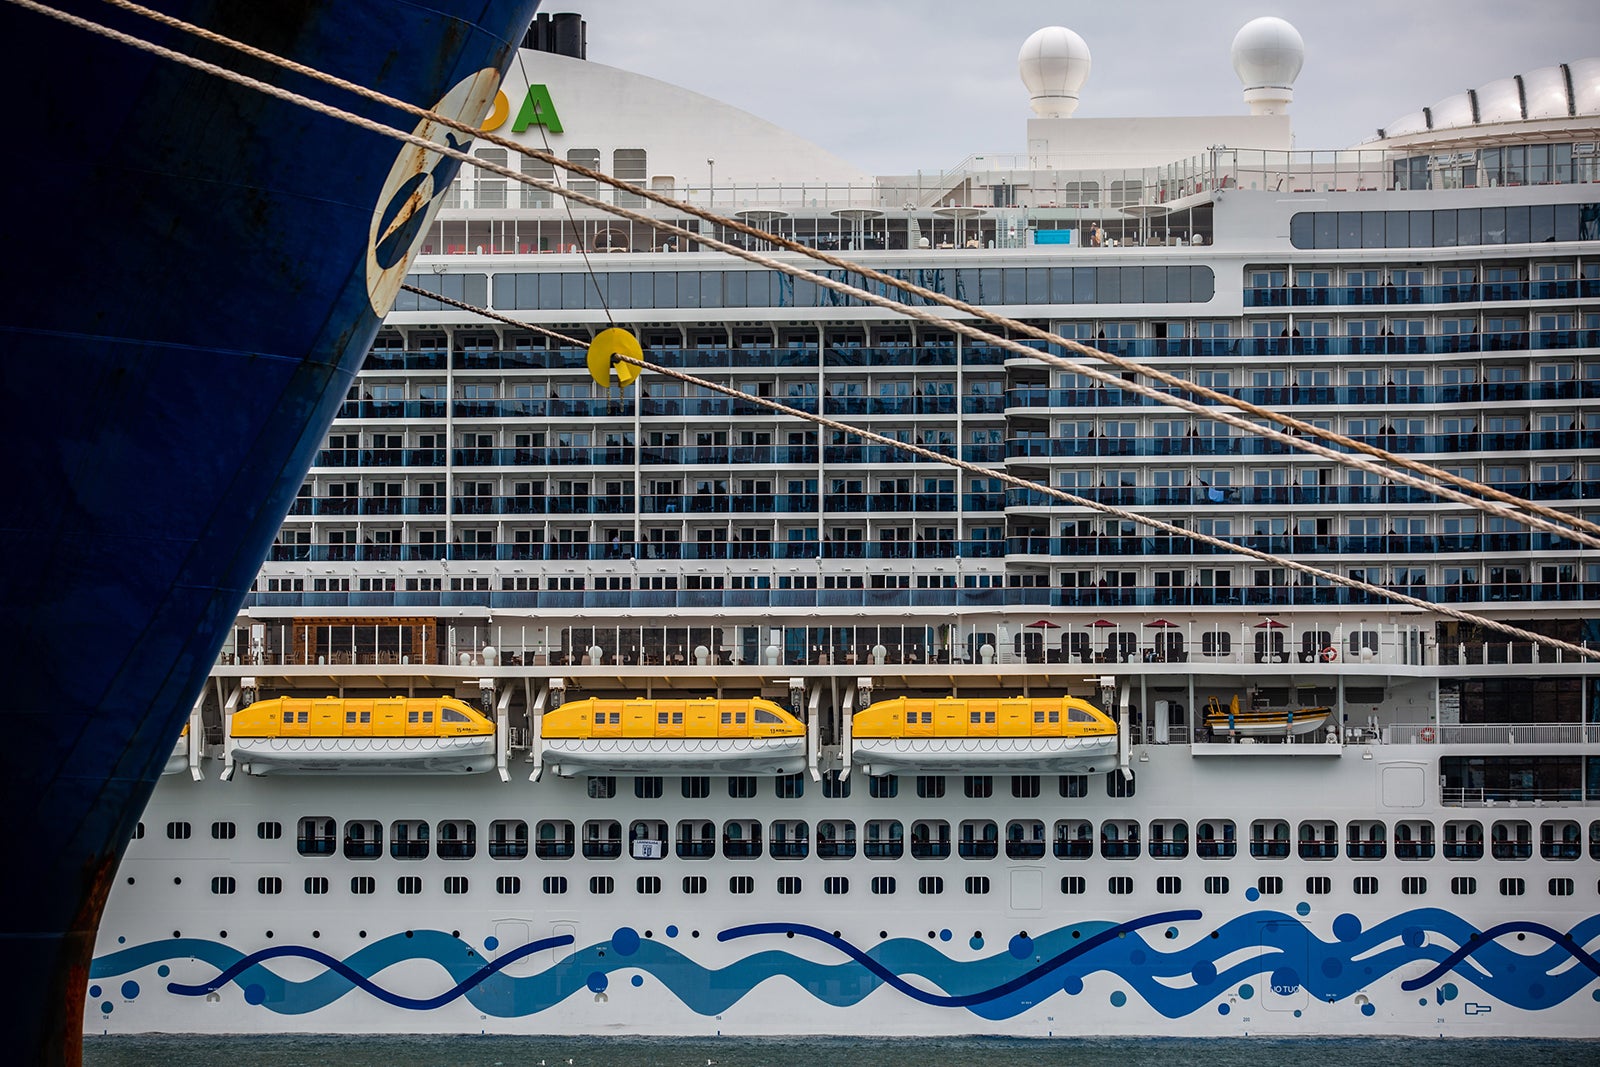 SHOULD I BOOK A STARBOARD OR PORTSIDE CABIN ON A CRUISE?